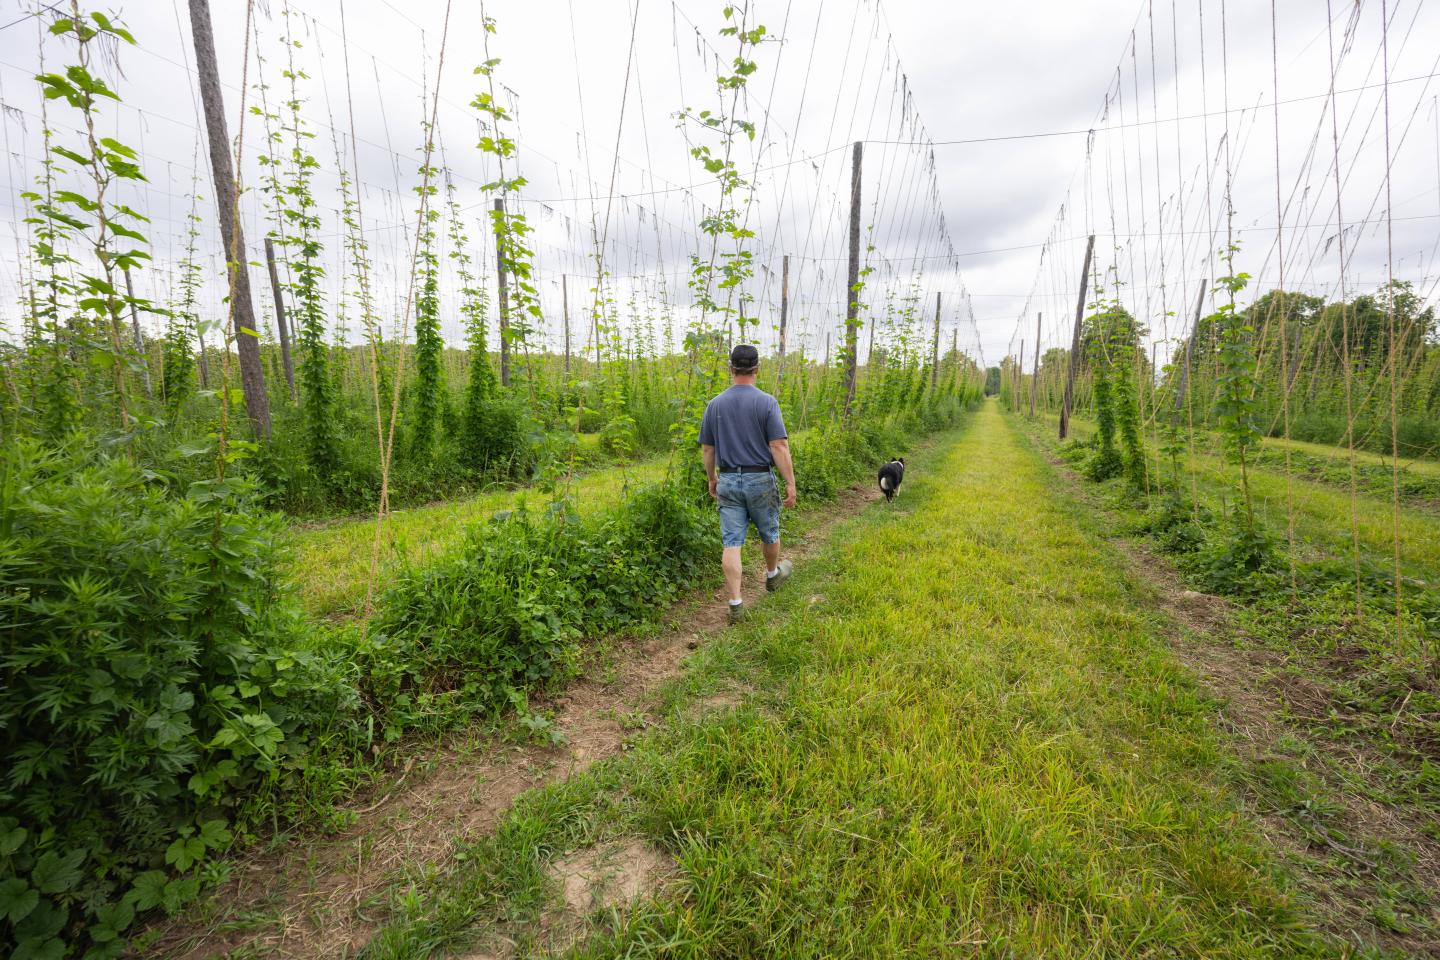 A man walks down a row of trellises with vines of hops growing up them